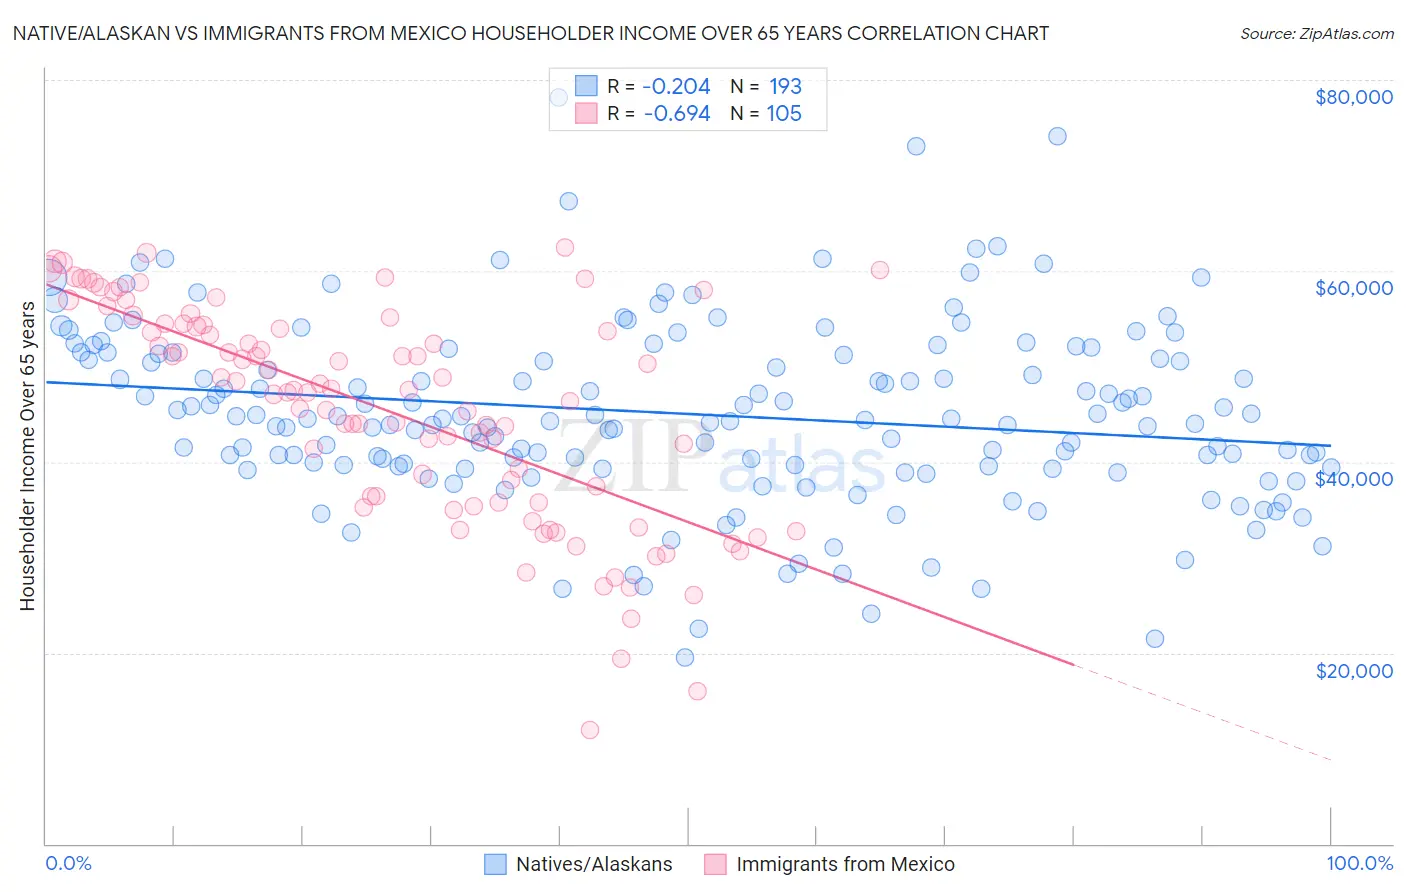 Native/Alaskan vs Immigrants from Mexico Householder Income Over 65 years